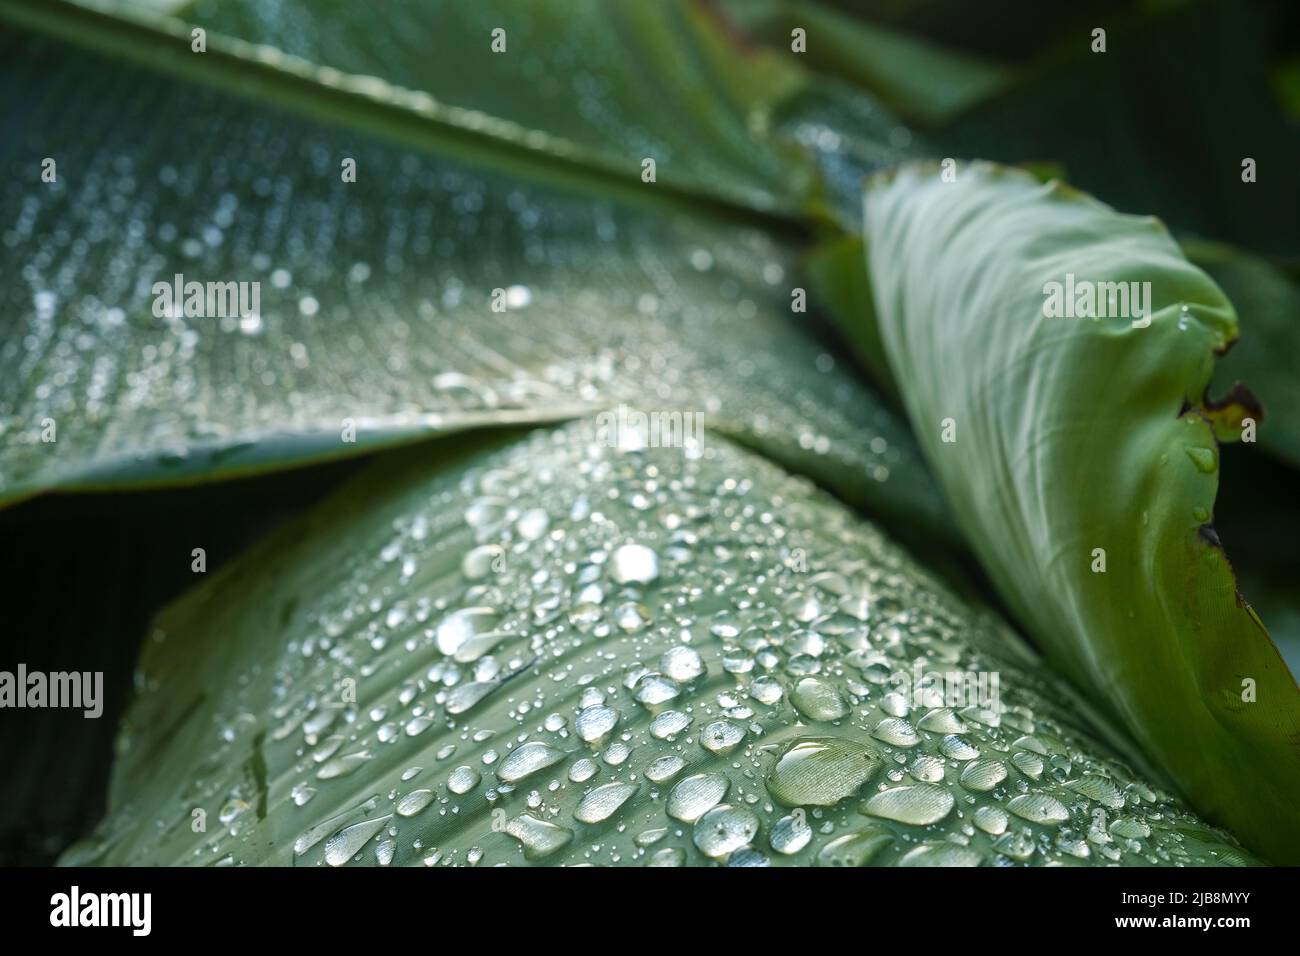 Droplets of dew on banana leaves Stock Photo